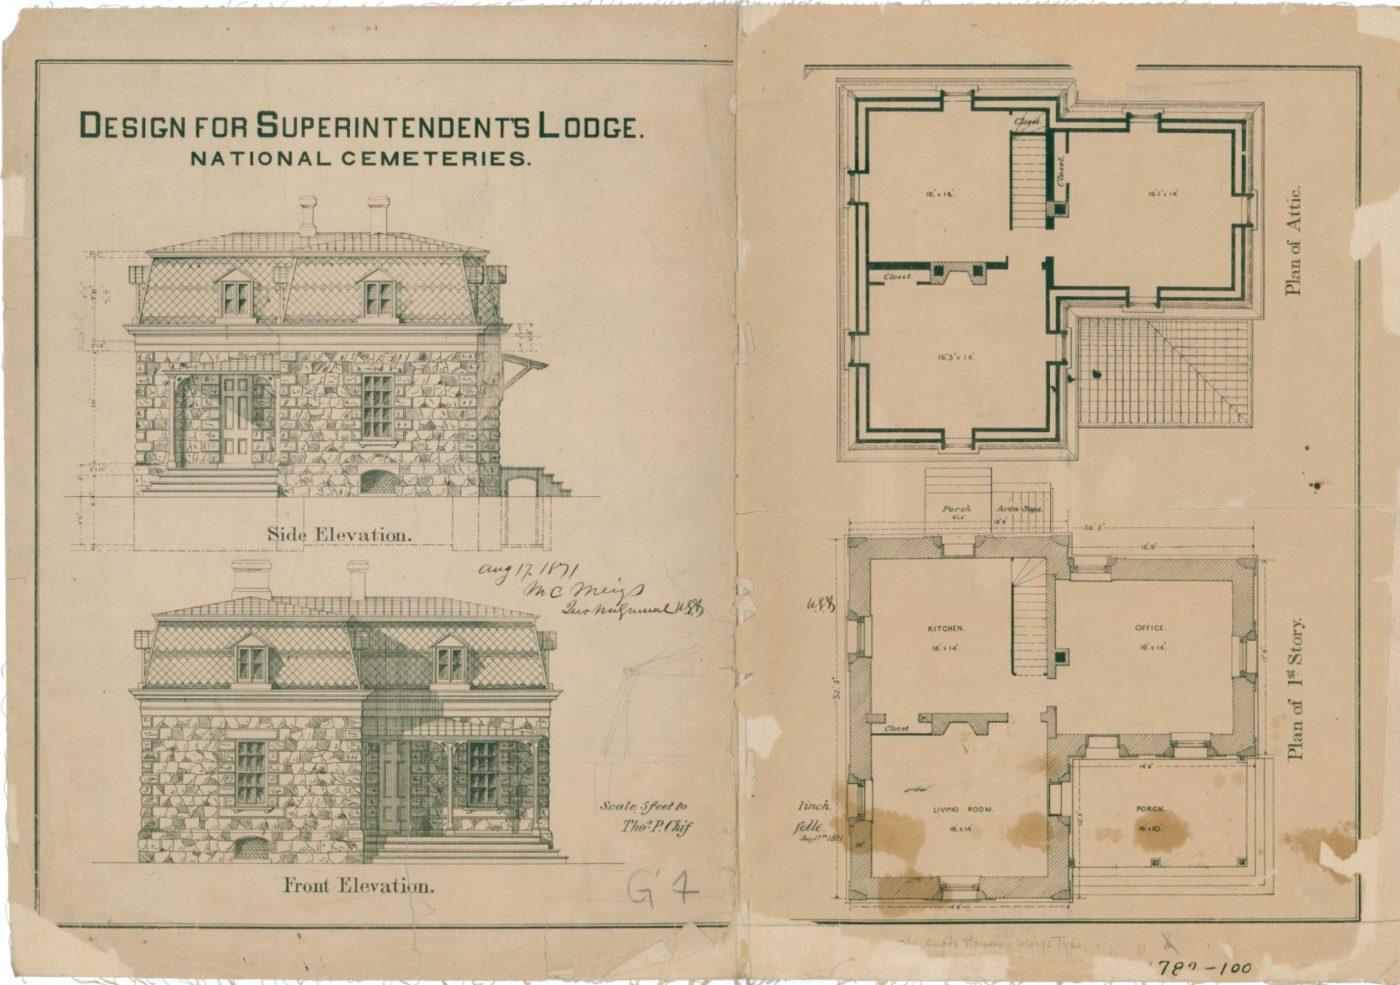 Elevation views and plans for the definitive superintendent lodges with signature of Quartermaster General Montgomery C. Meigs, dated August 17, 1871. (NCA)